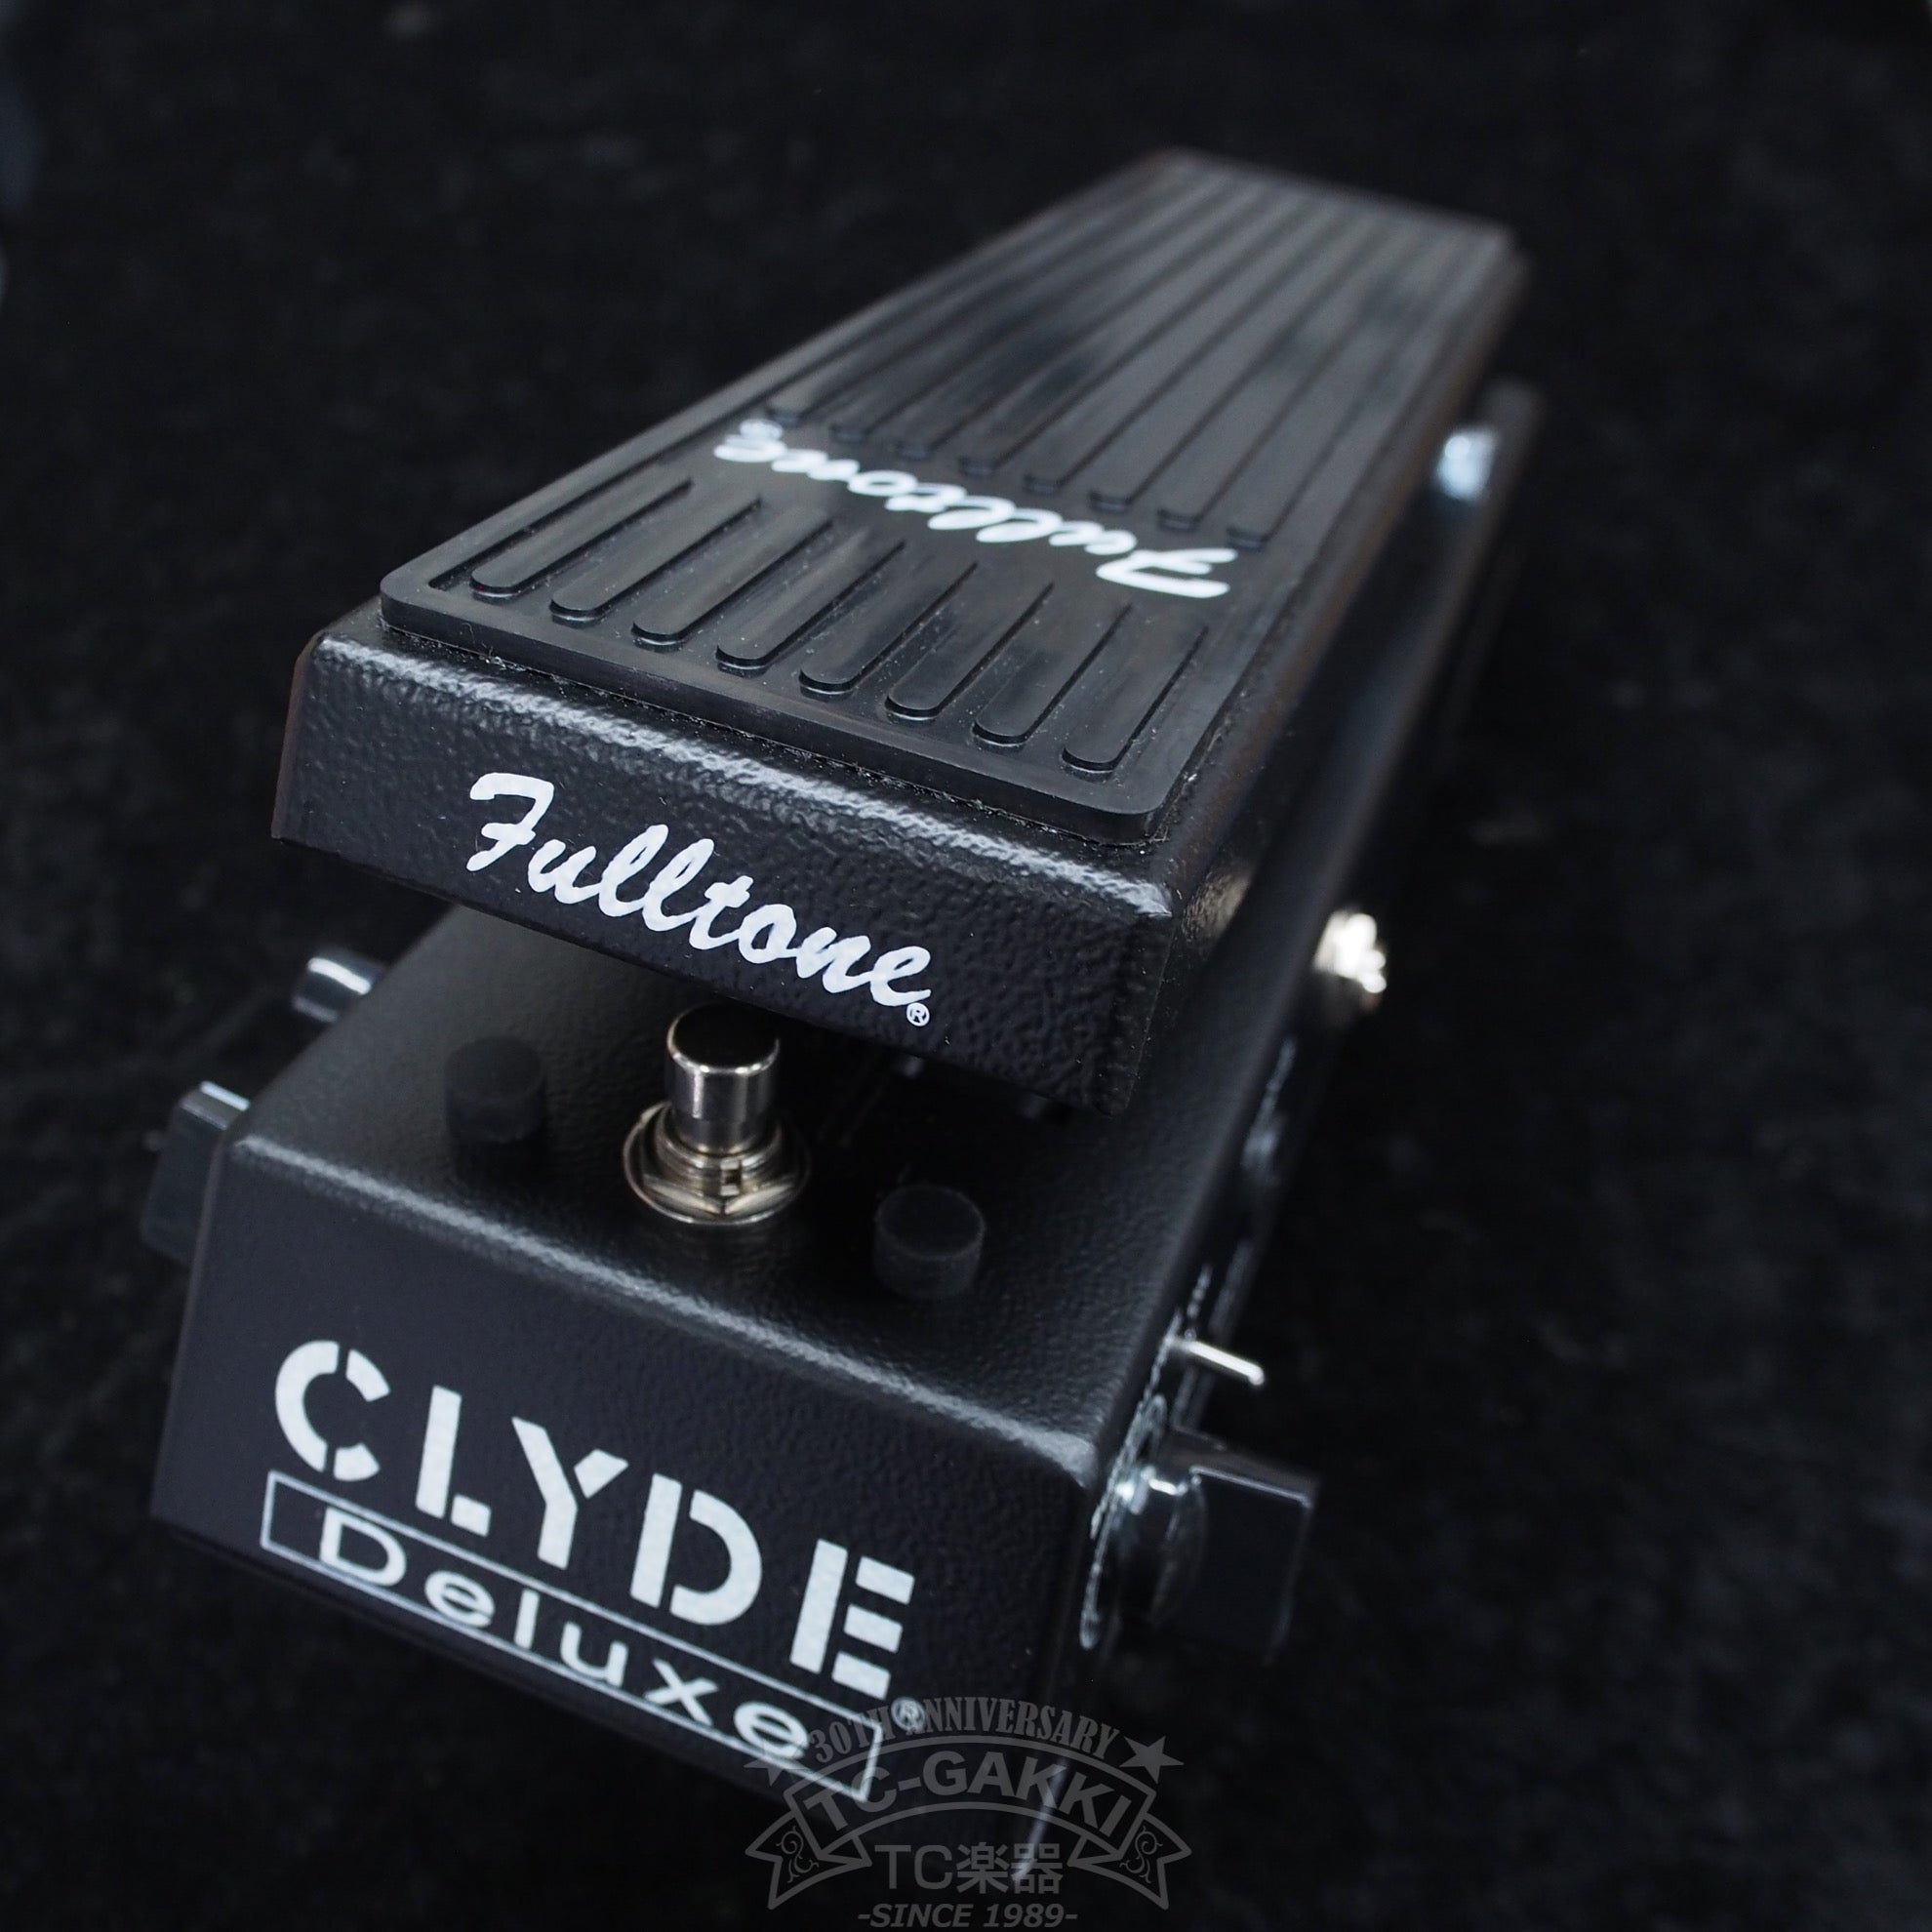 Fulltone CLYDE Deluxe Wah Wah Pedalよろしくお願いします